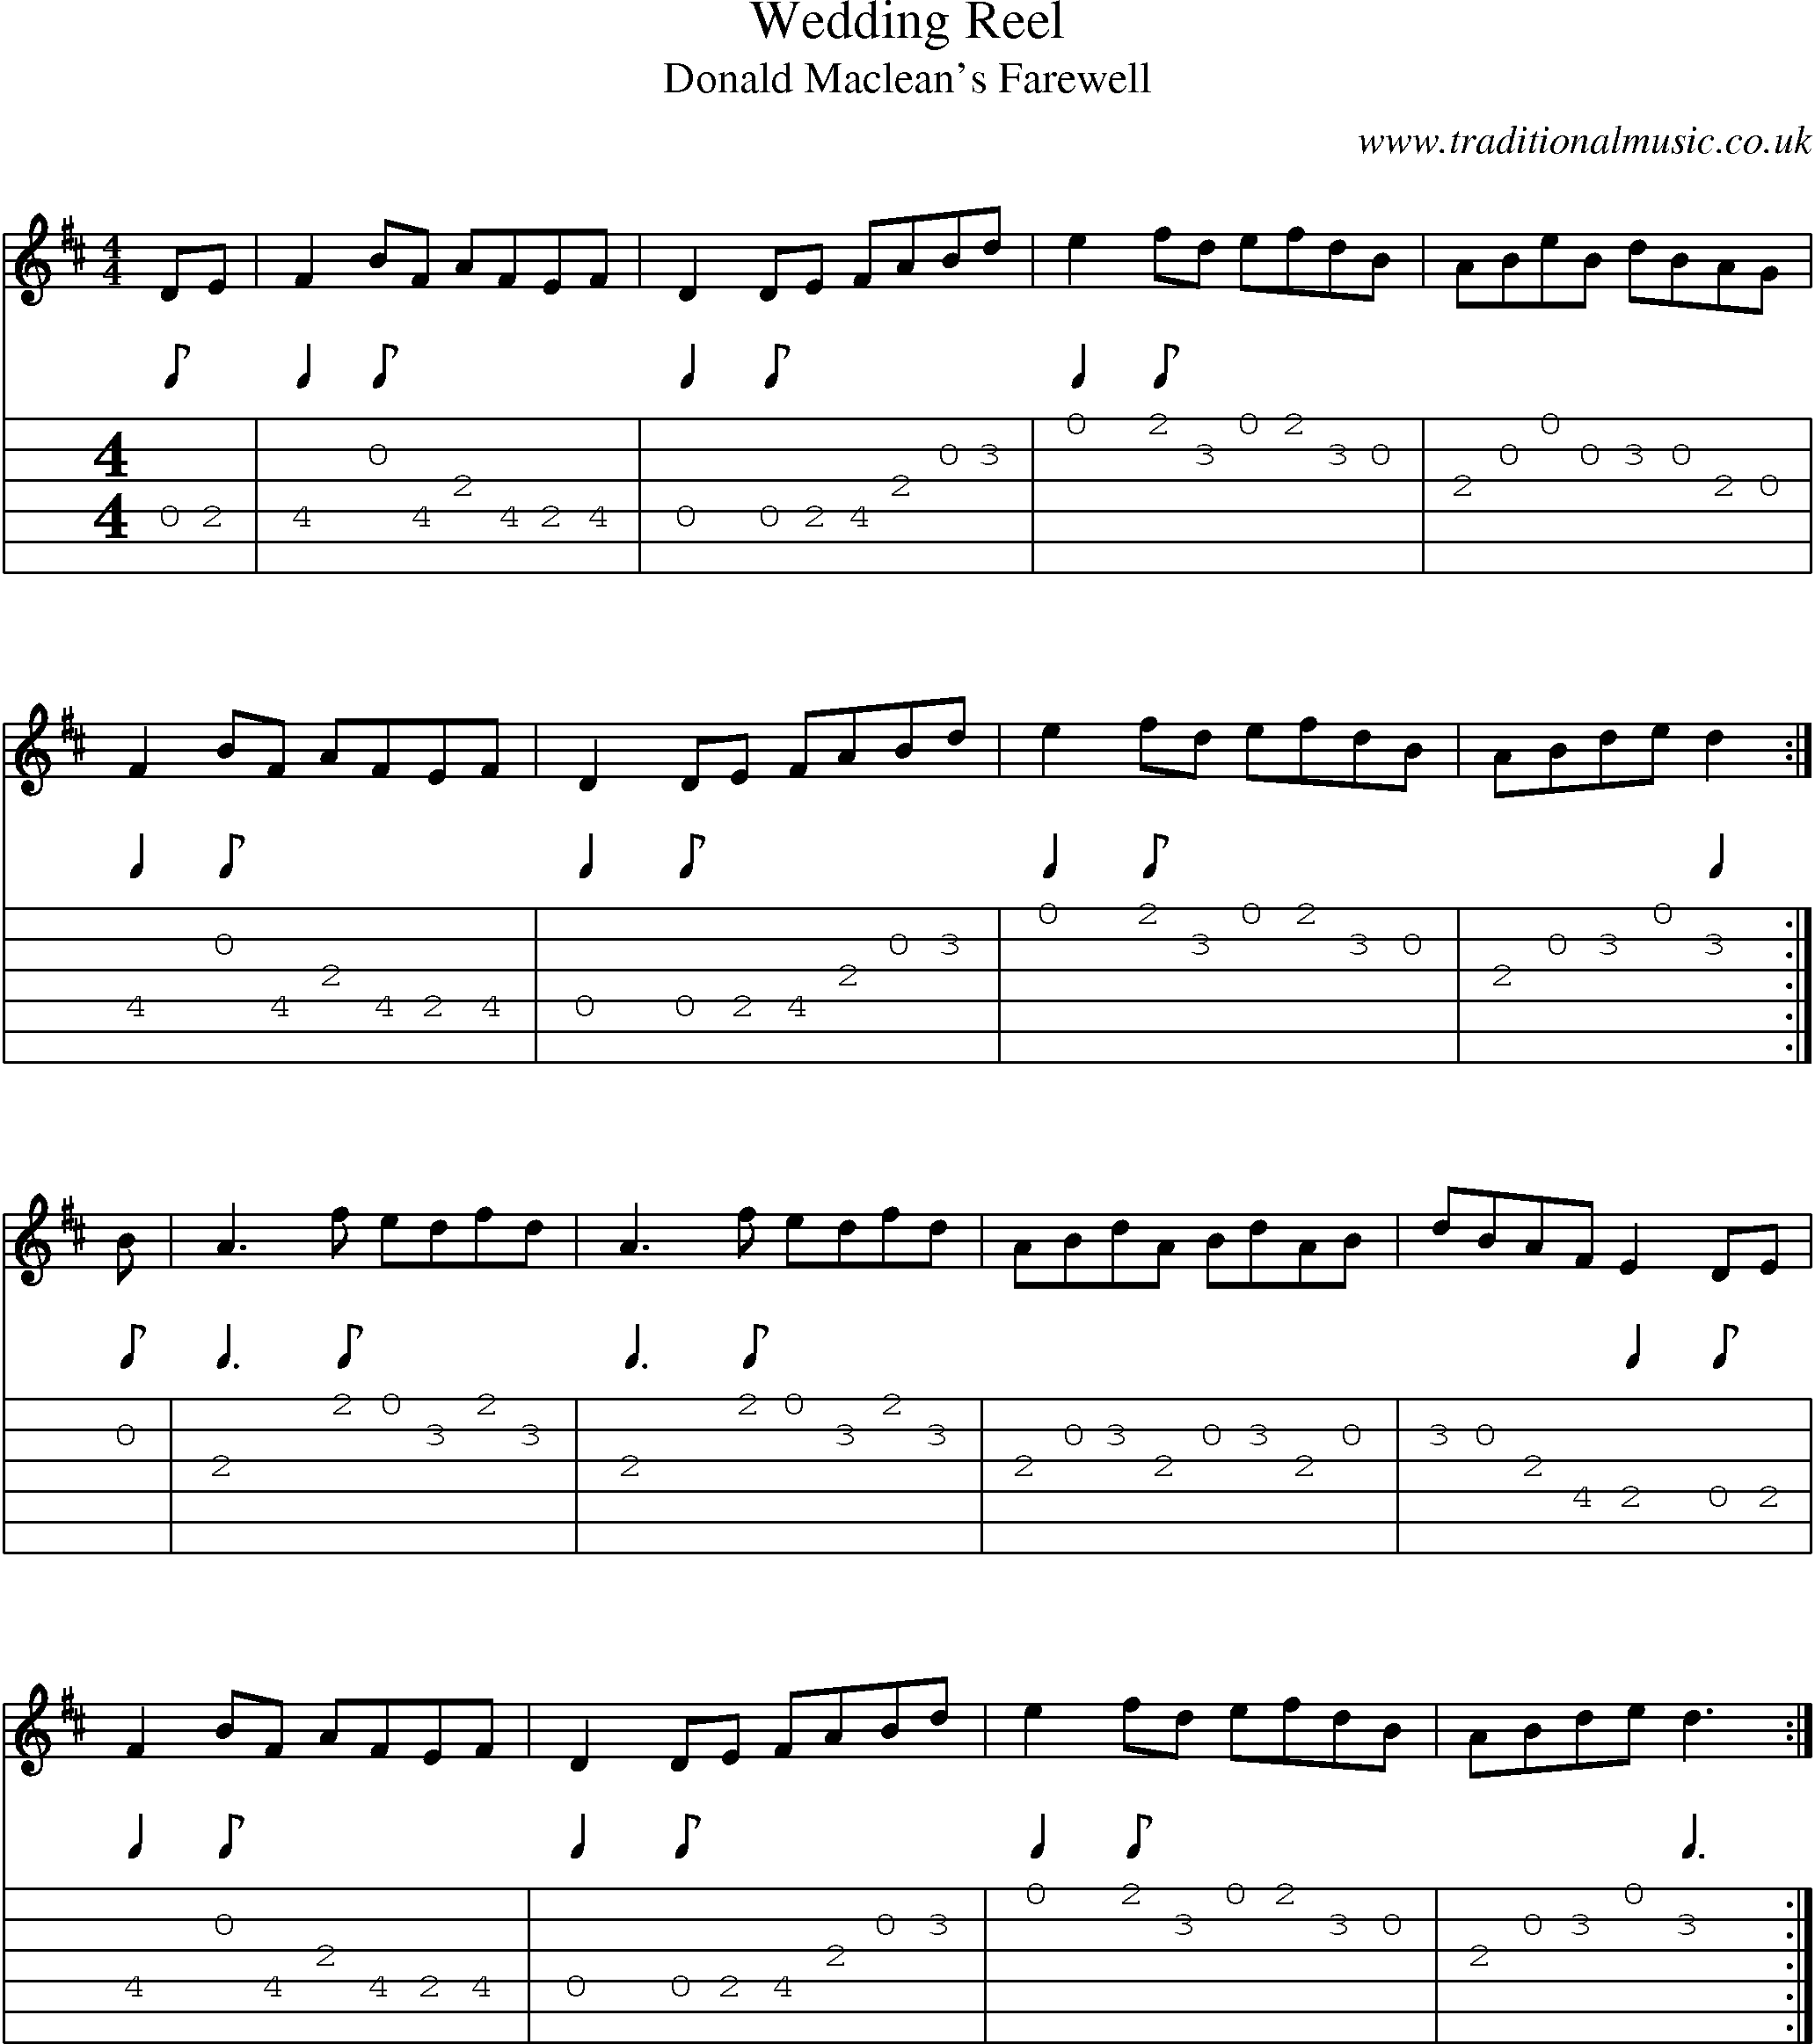 Music Score and Guitar Tabs for Wedding Reel